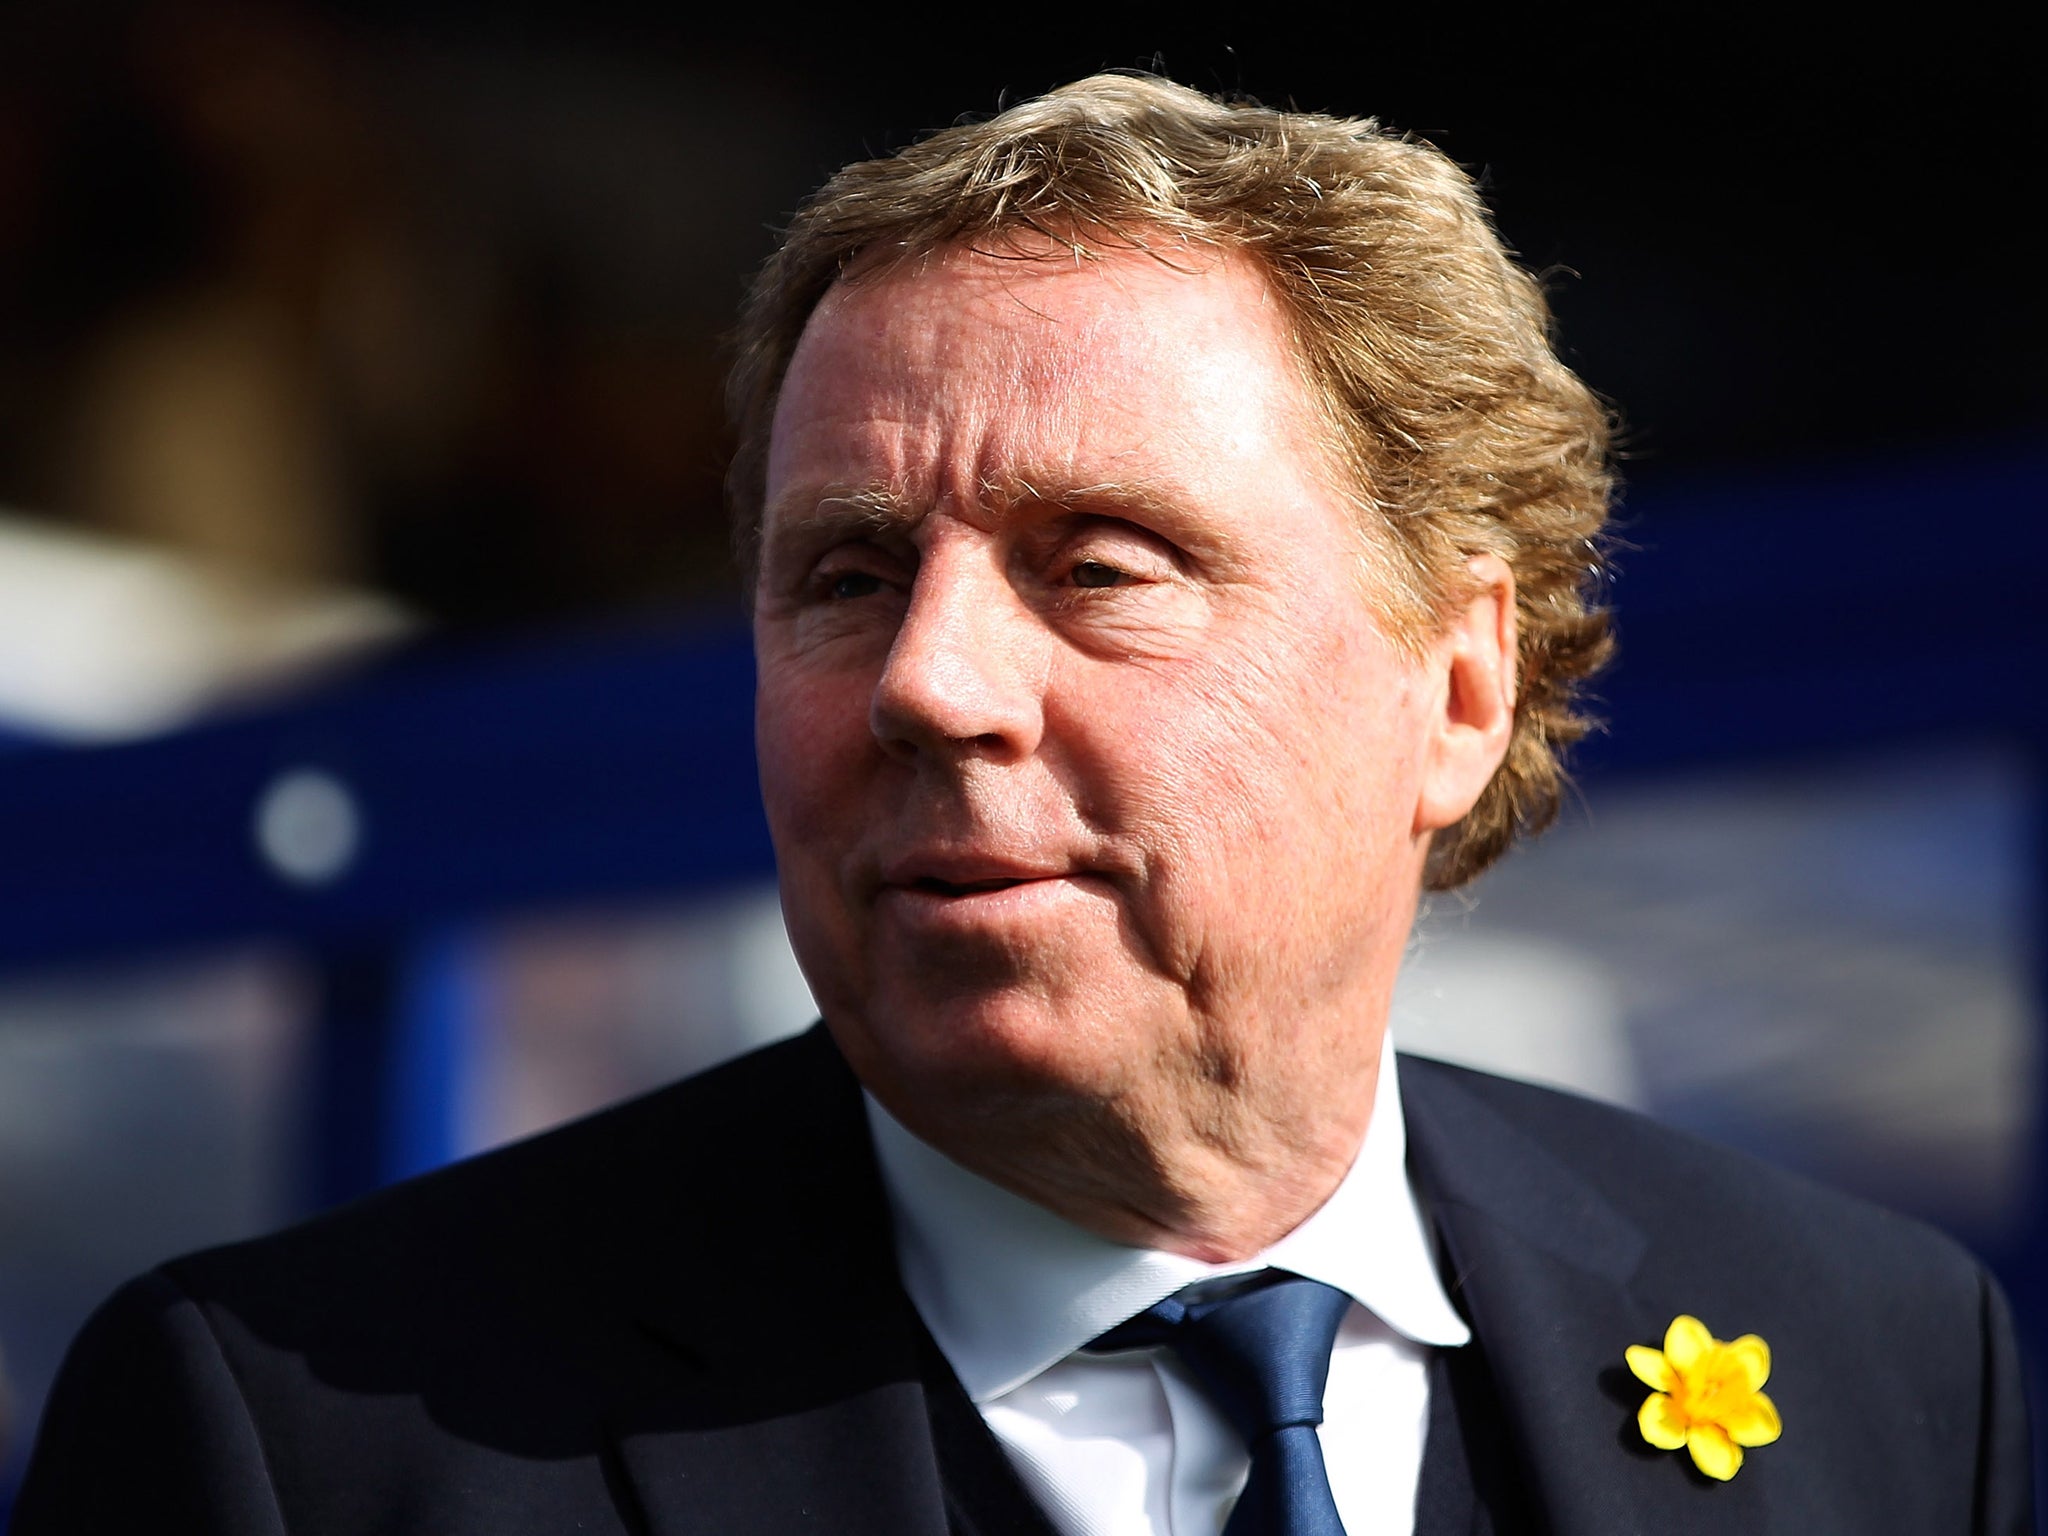 Harry Redknapp feels his attempts to gain promotion for QPR are being hampered by the growing injury problems